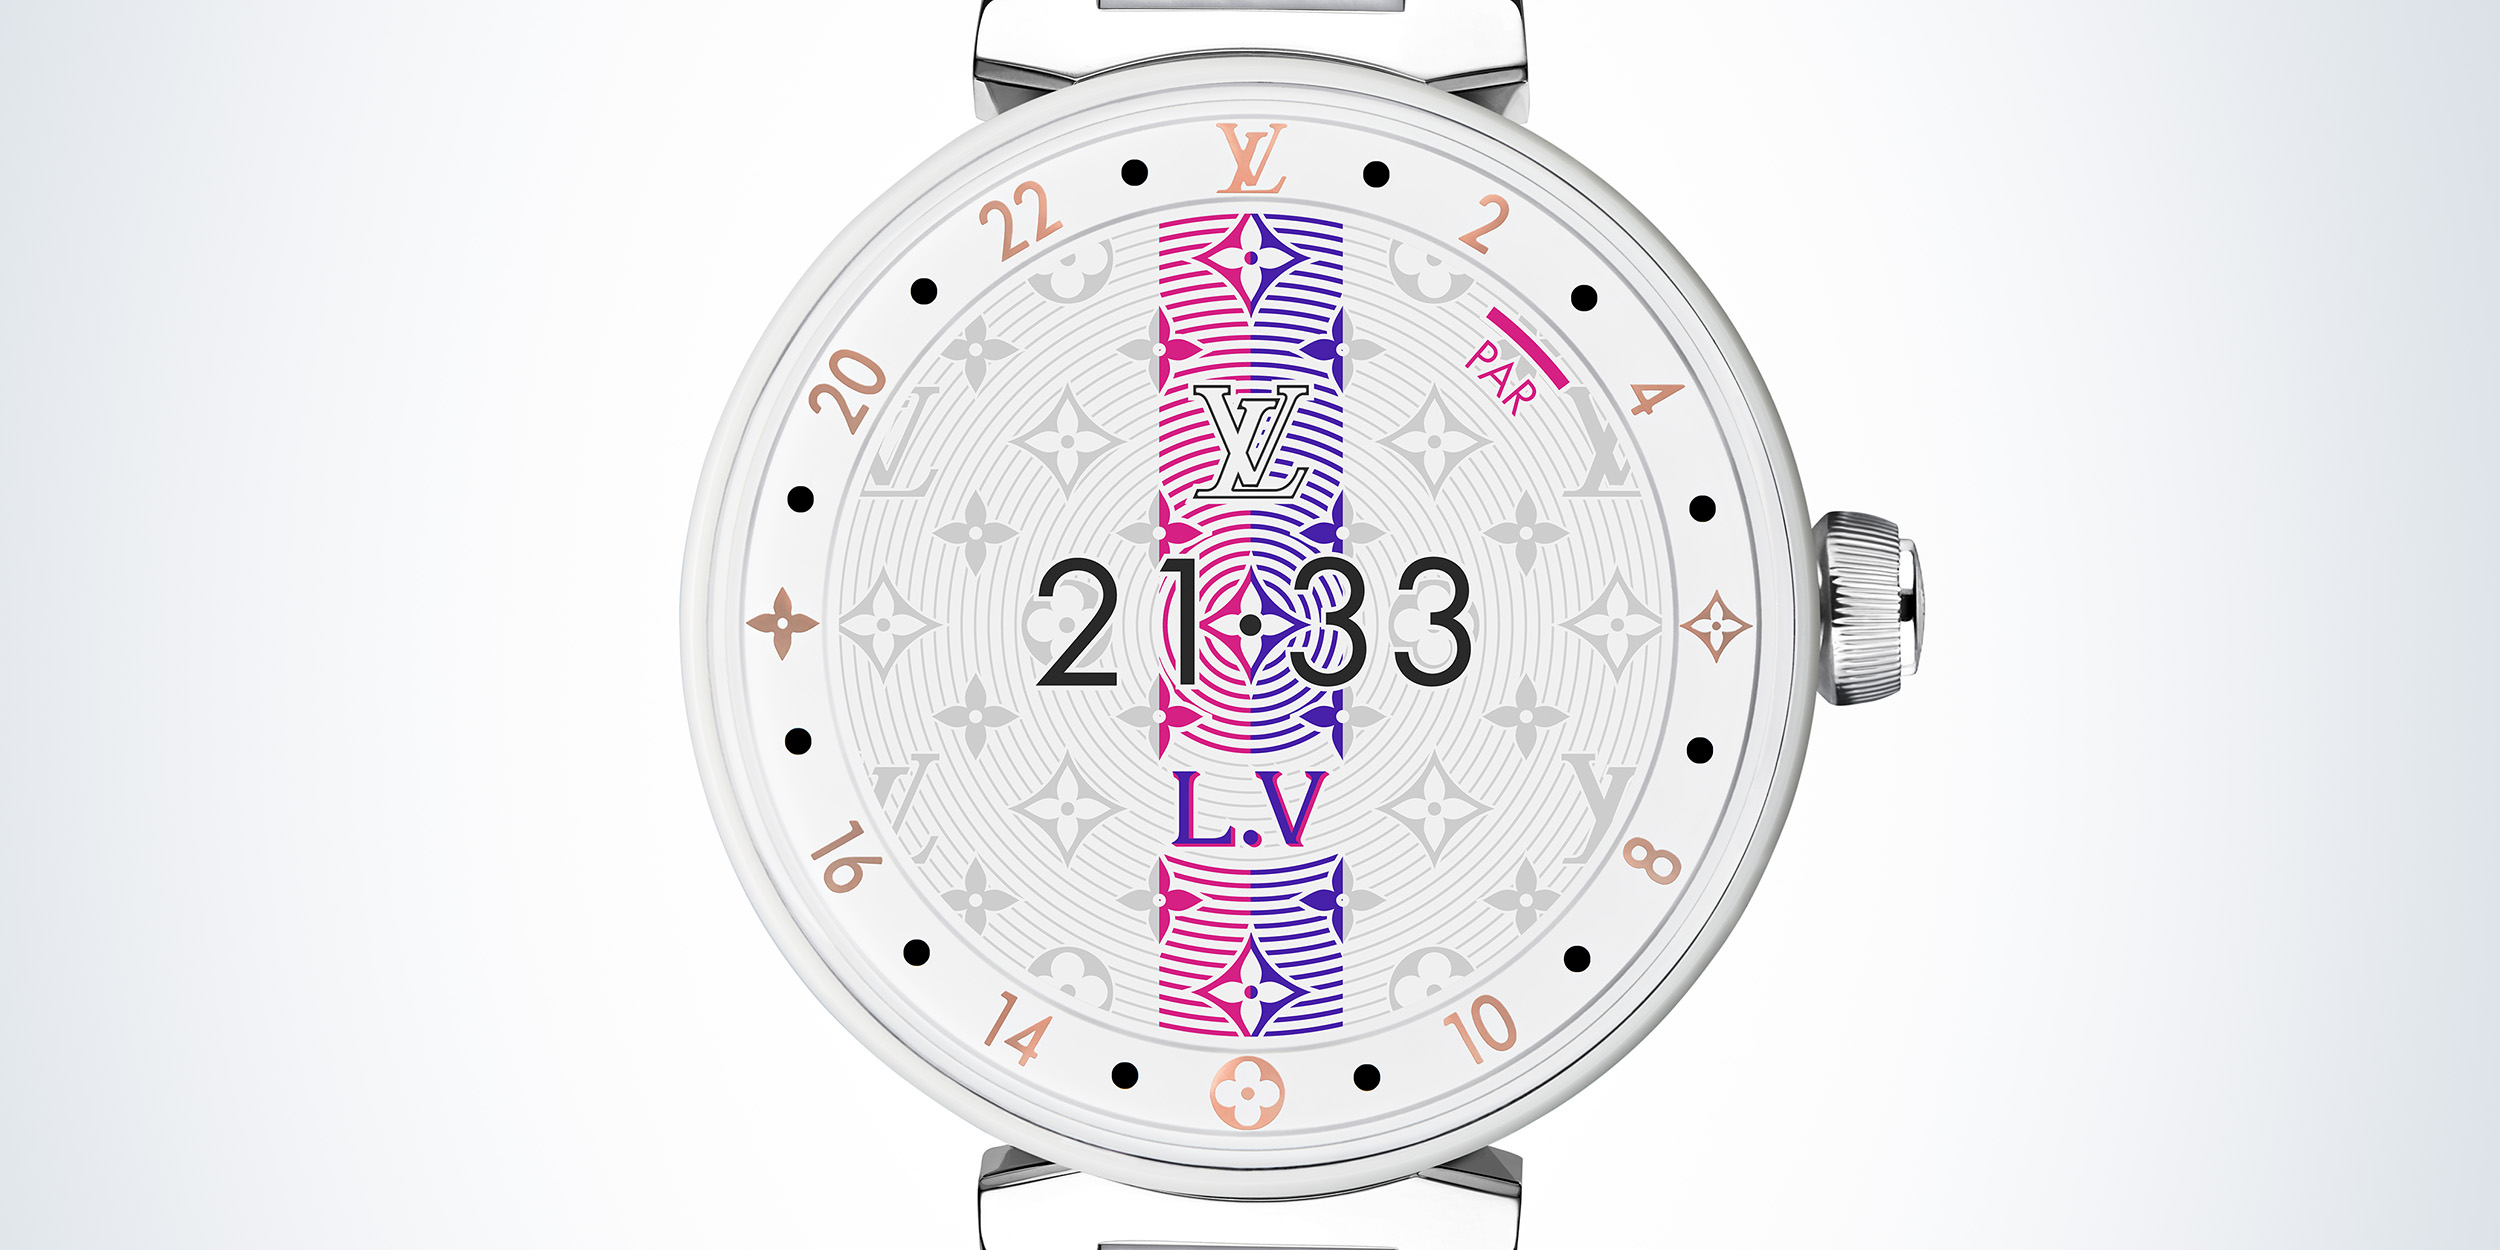 Louis Vuitton's first Android Wear device, Tambour Horizon, starts